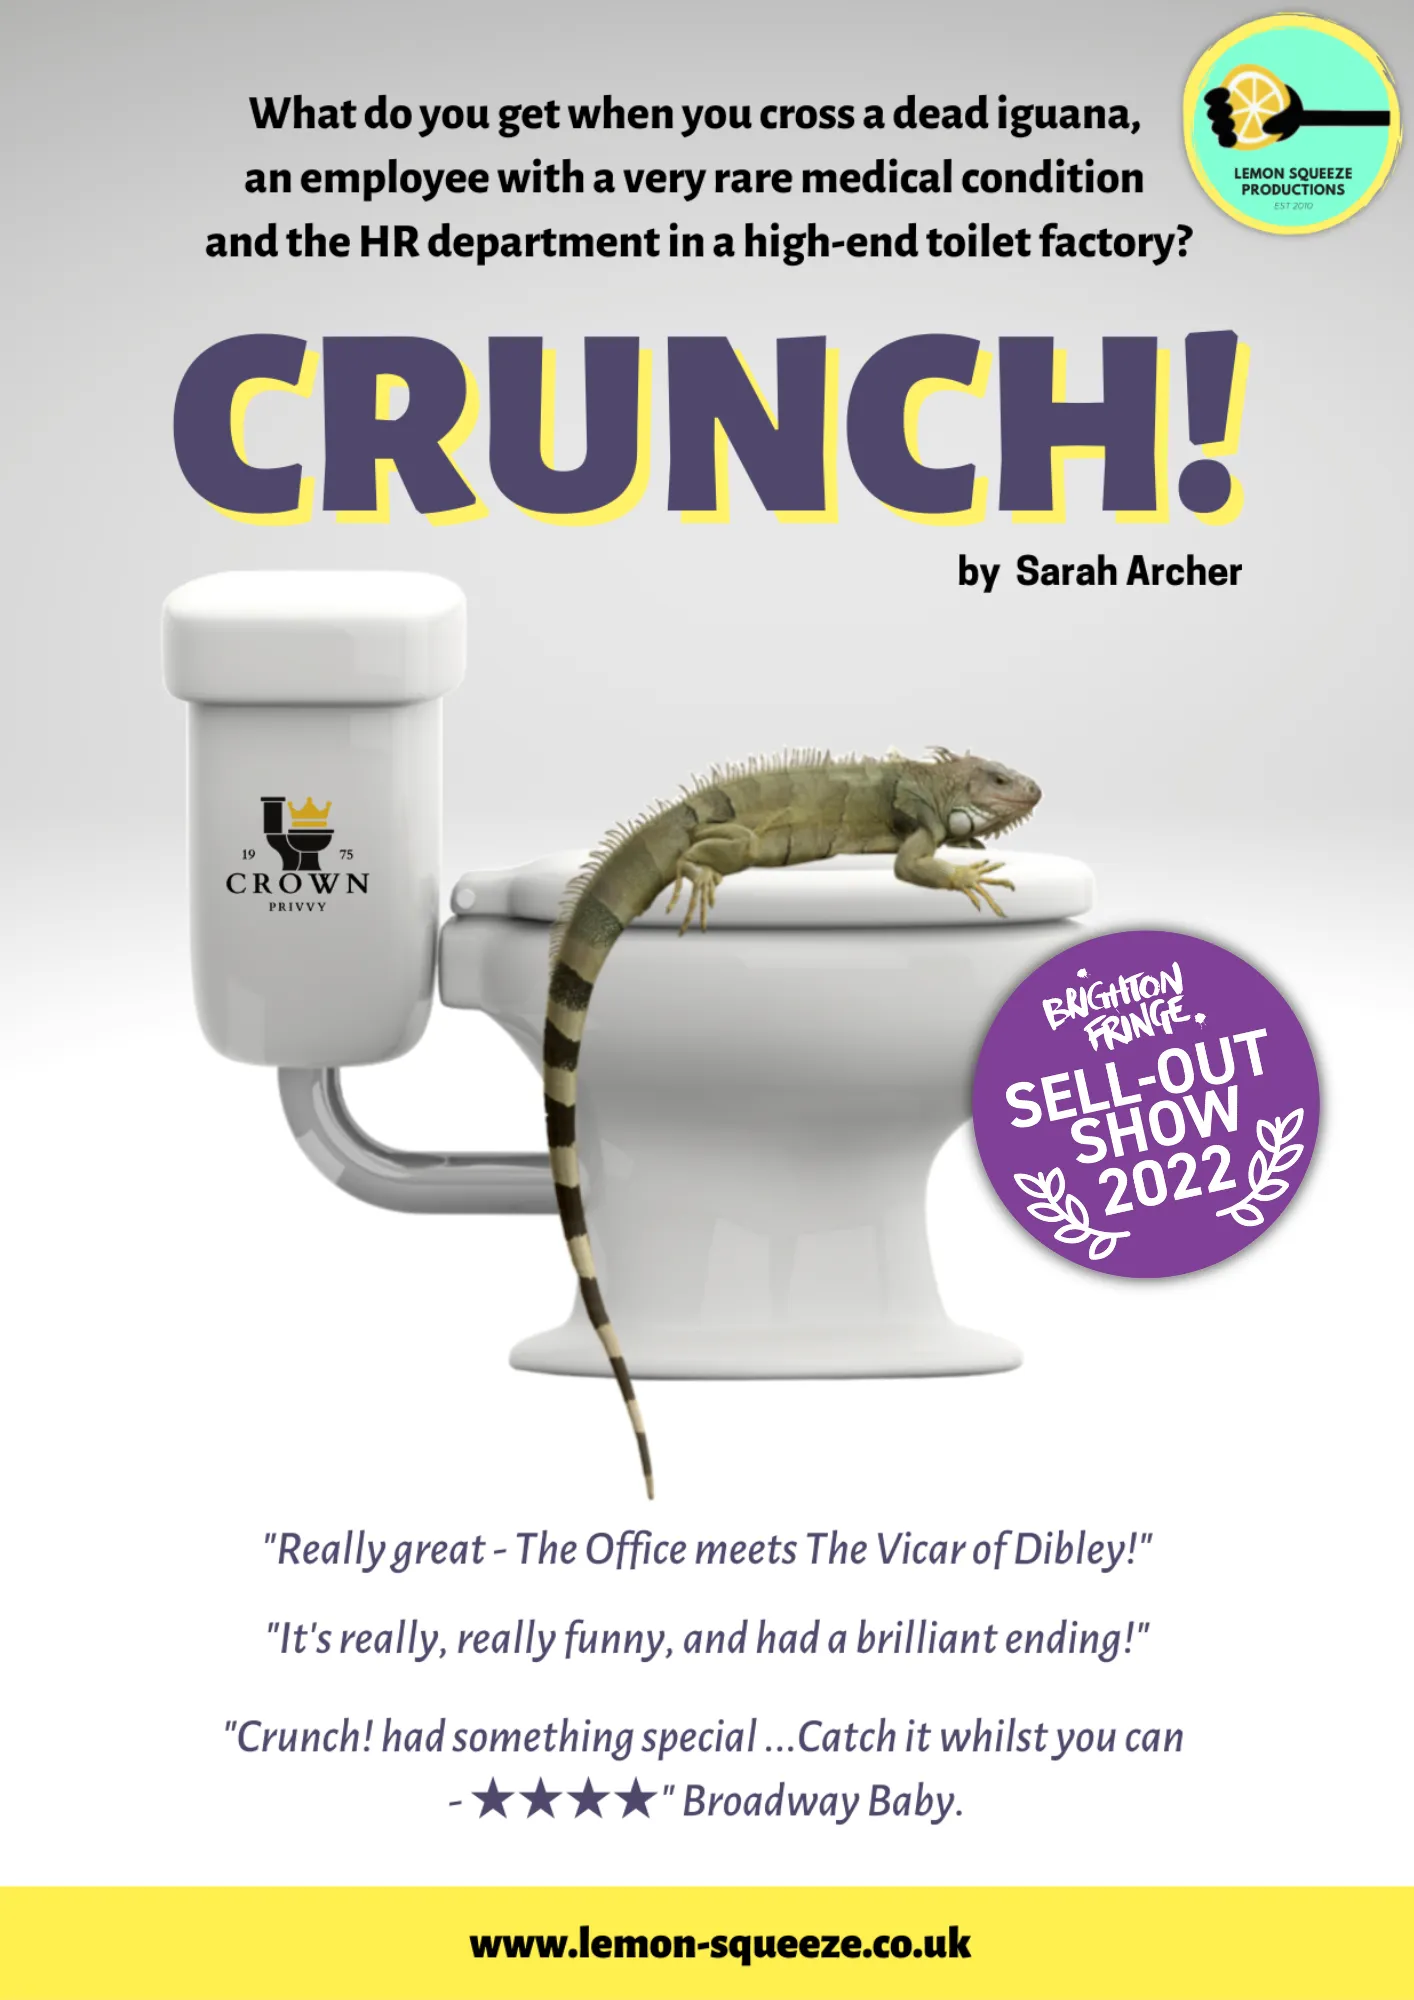 'Crunch' the play